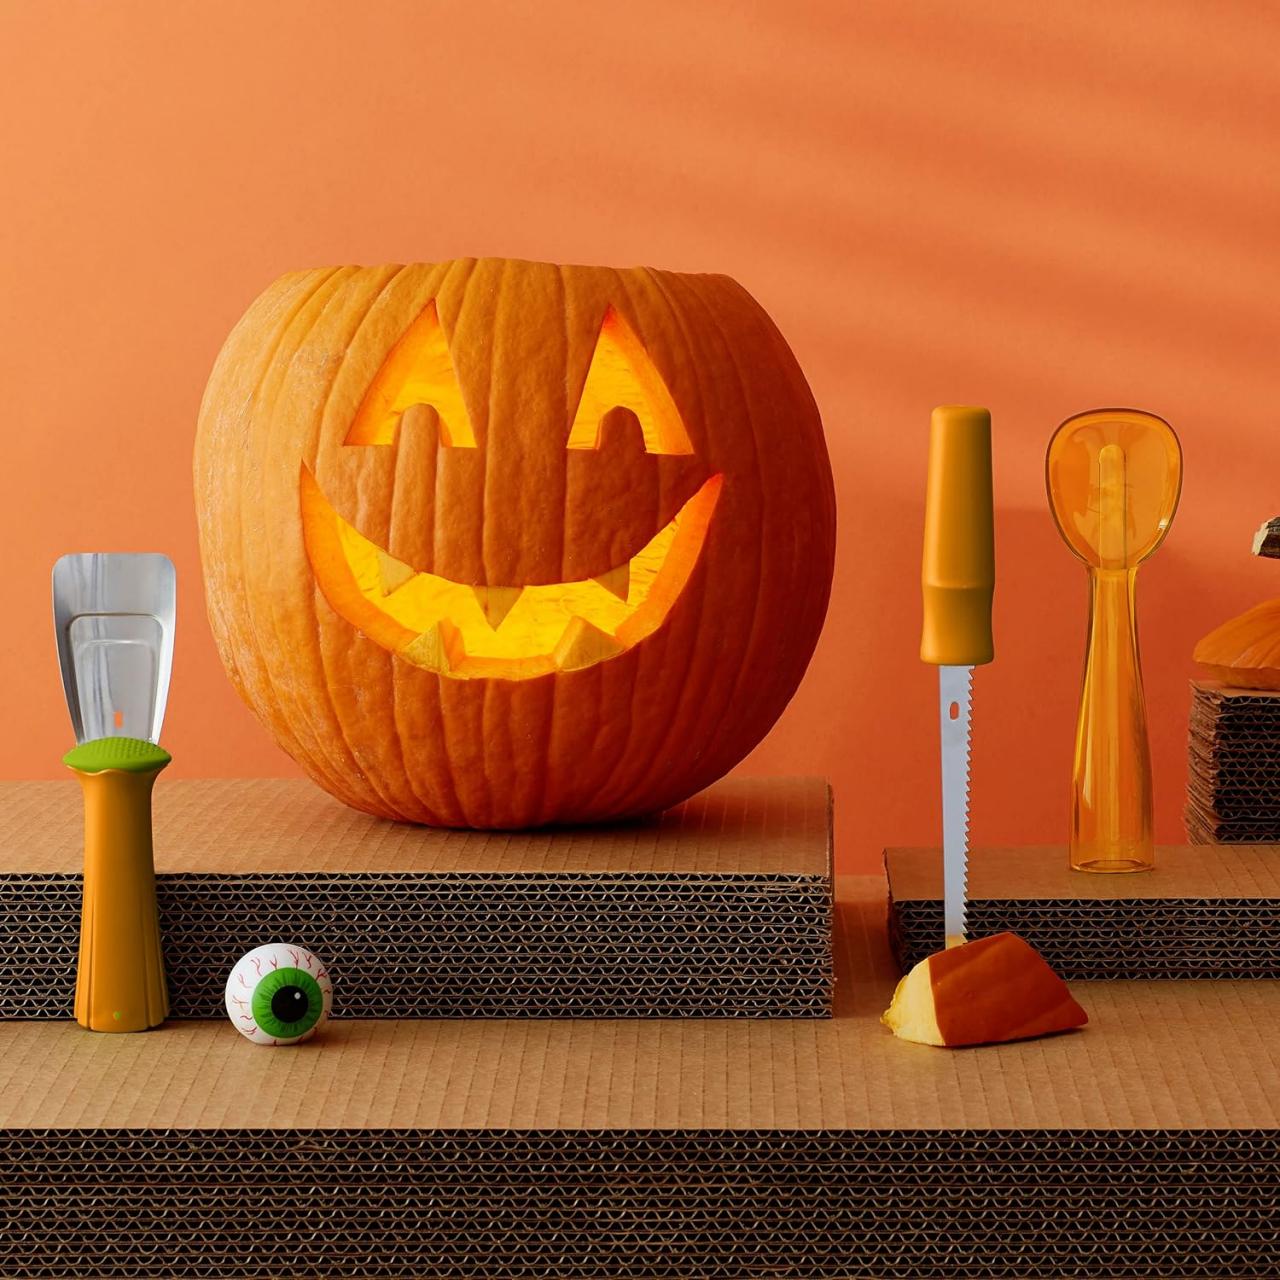 https://food.fnr.sndimg.com/content/dam/images/food/products/2023/9/28/rx_amazon_best-for-one-chefn-halloween-3-in-1-nesting-pumpkin-tool-set.jpeg.rend.hgtvcom.1280.1280.suffix/1695921685163.jpeg